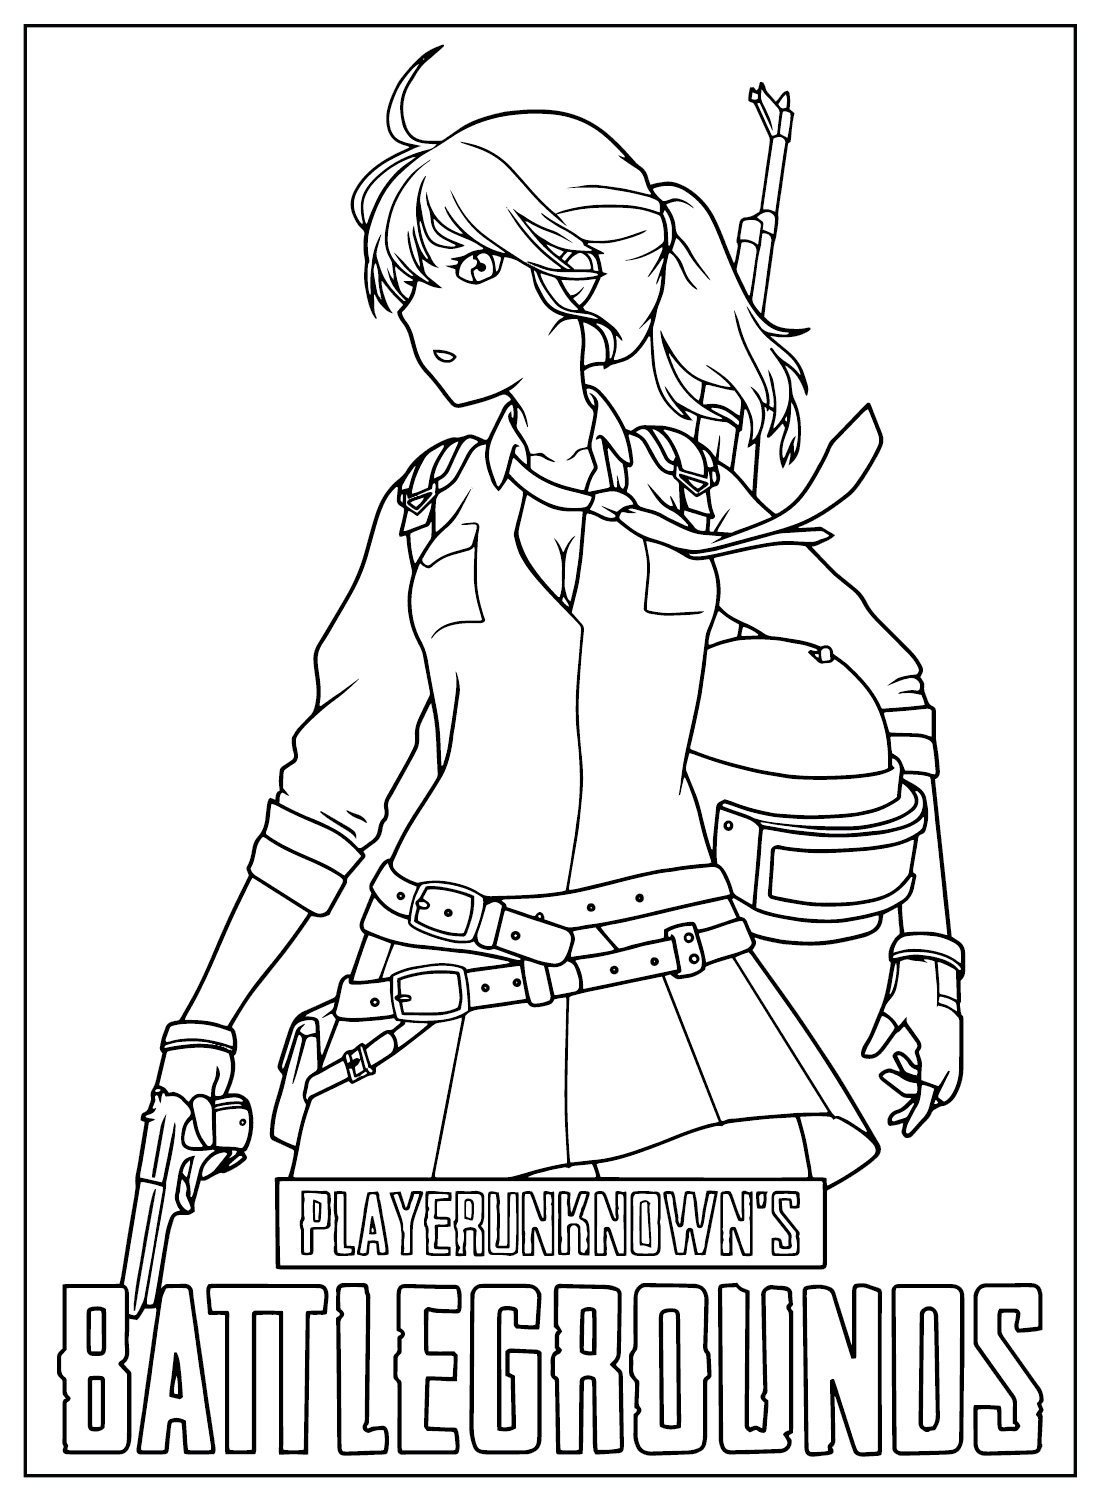 Pubg Battle Royale Coloring Page - Free Printable Coloring Pages